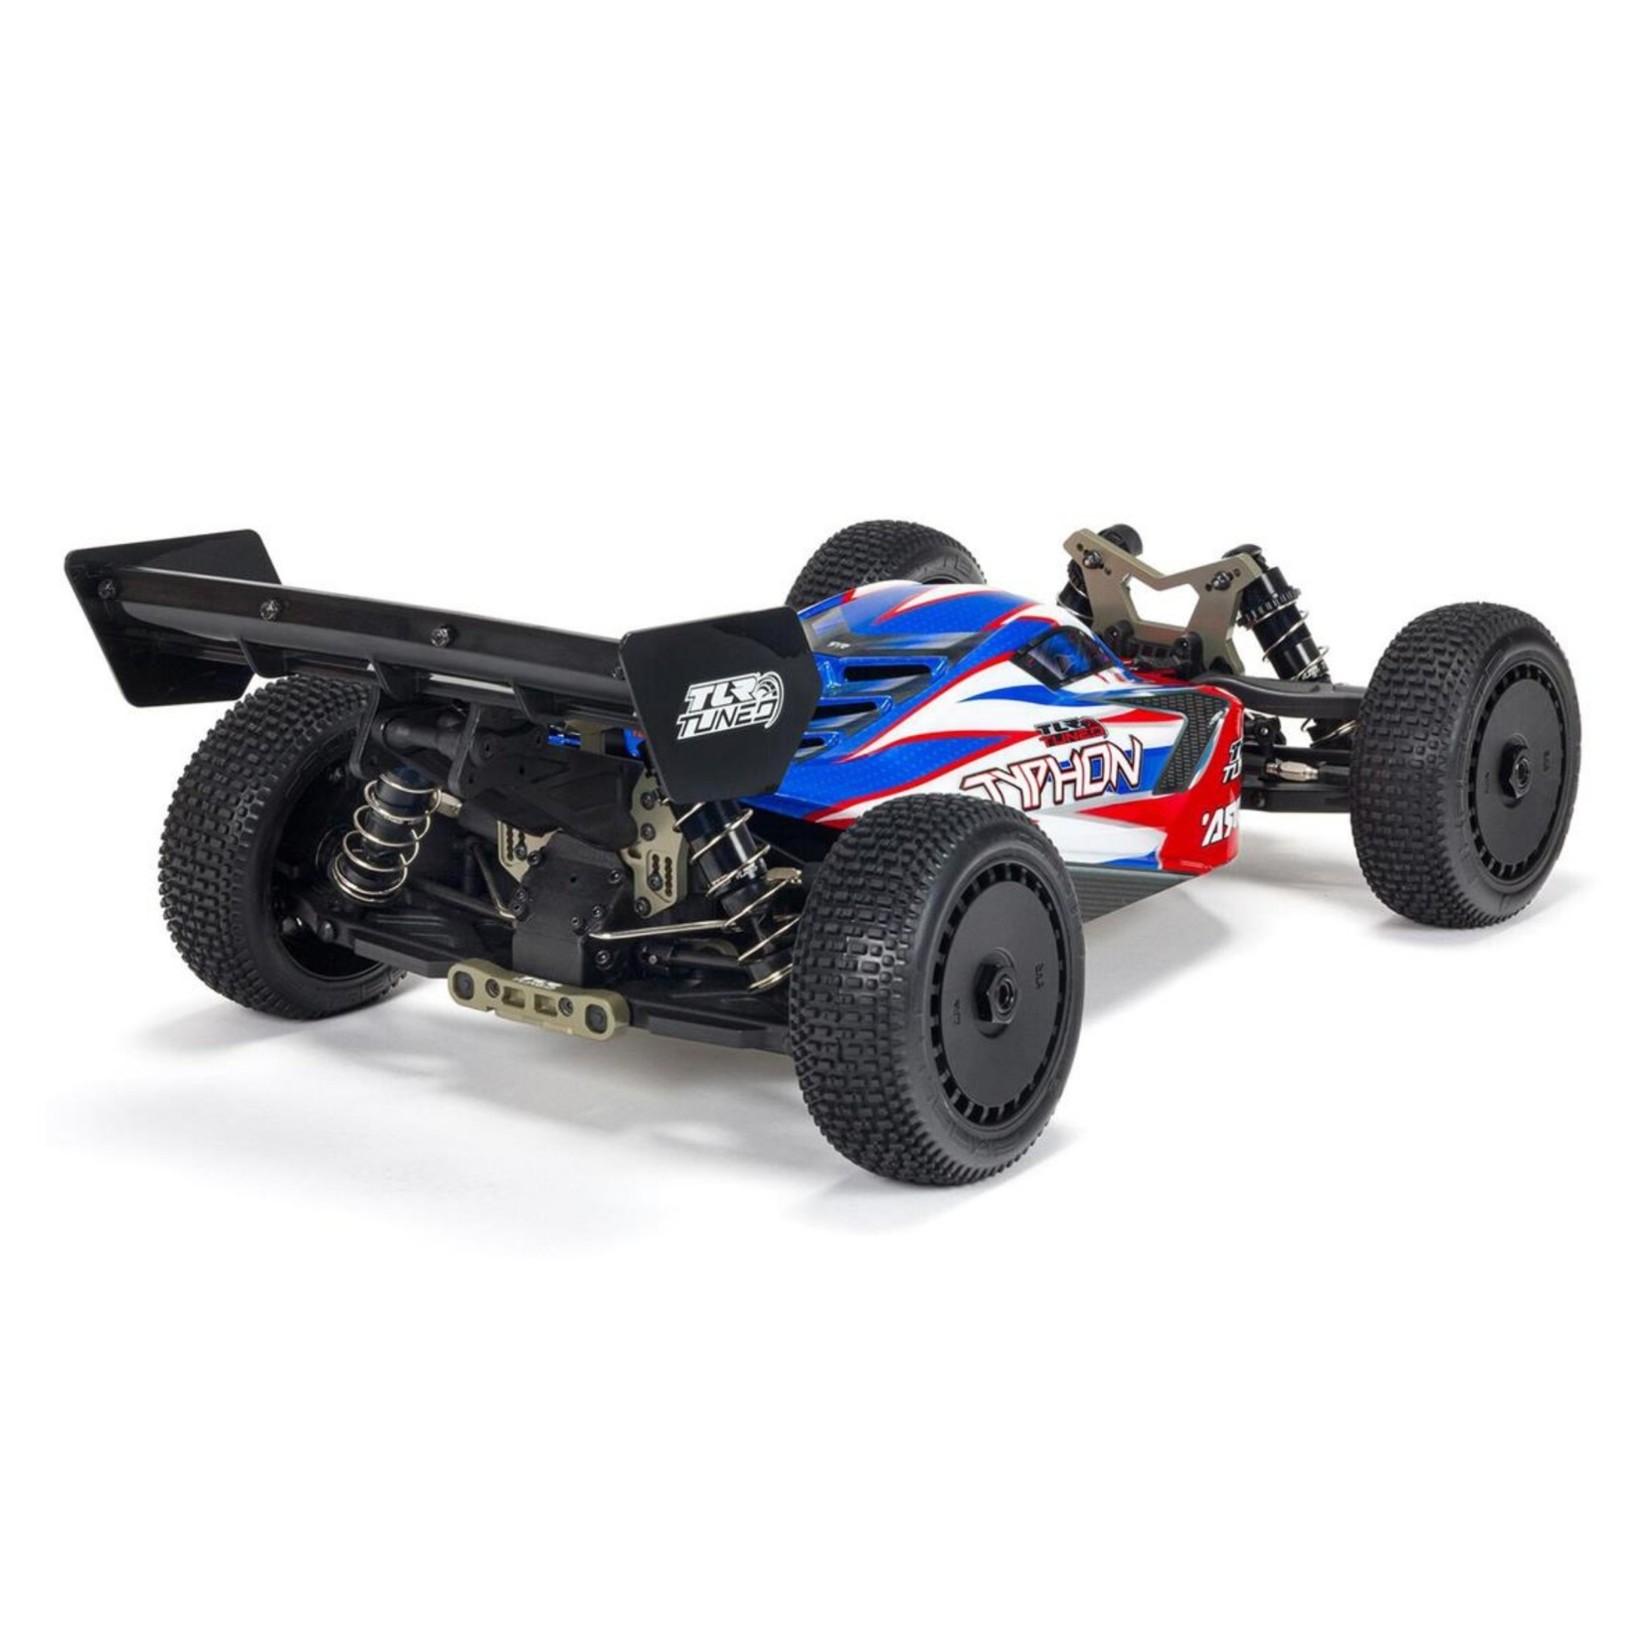 ARRMA Arrma Typhon 6S "TLR Tuned" 1/8 4WD RTR Buggy (Red/Blue) #ARA8406